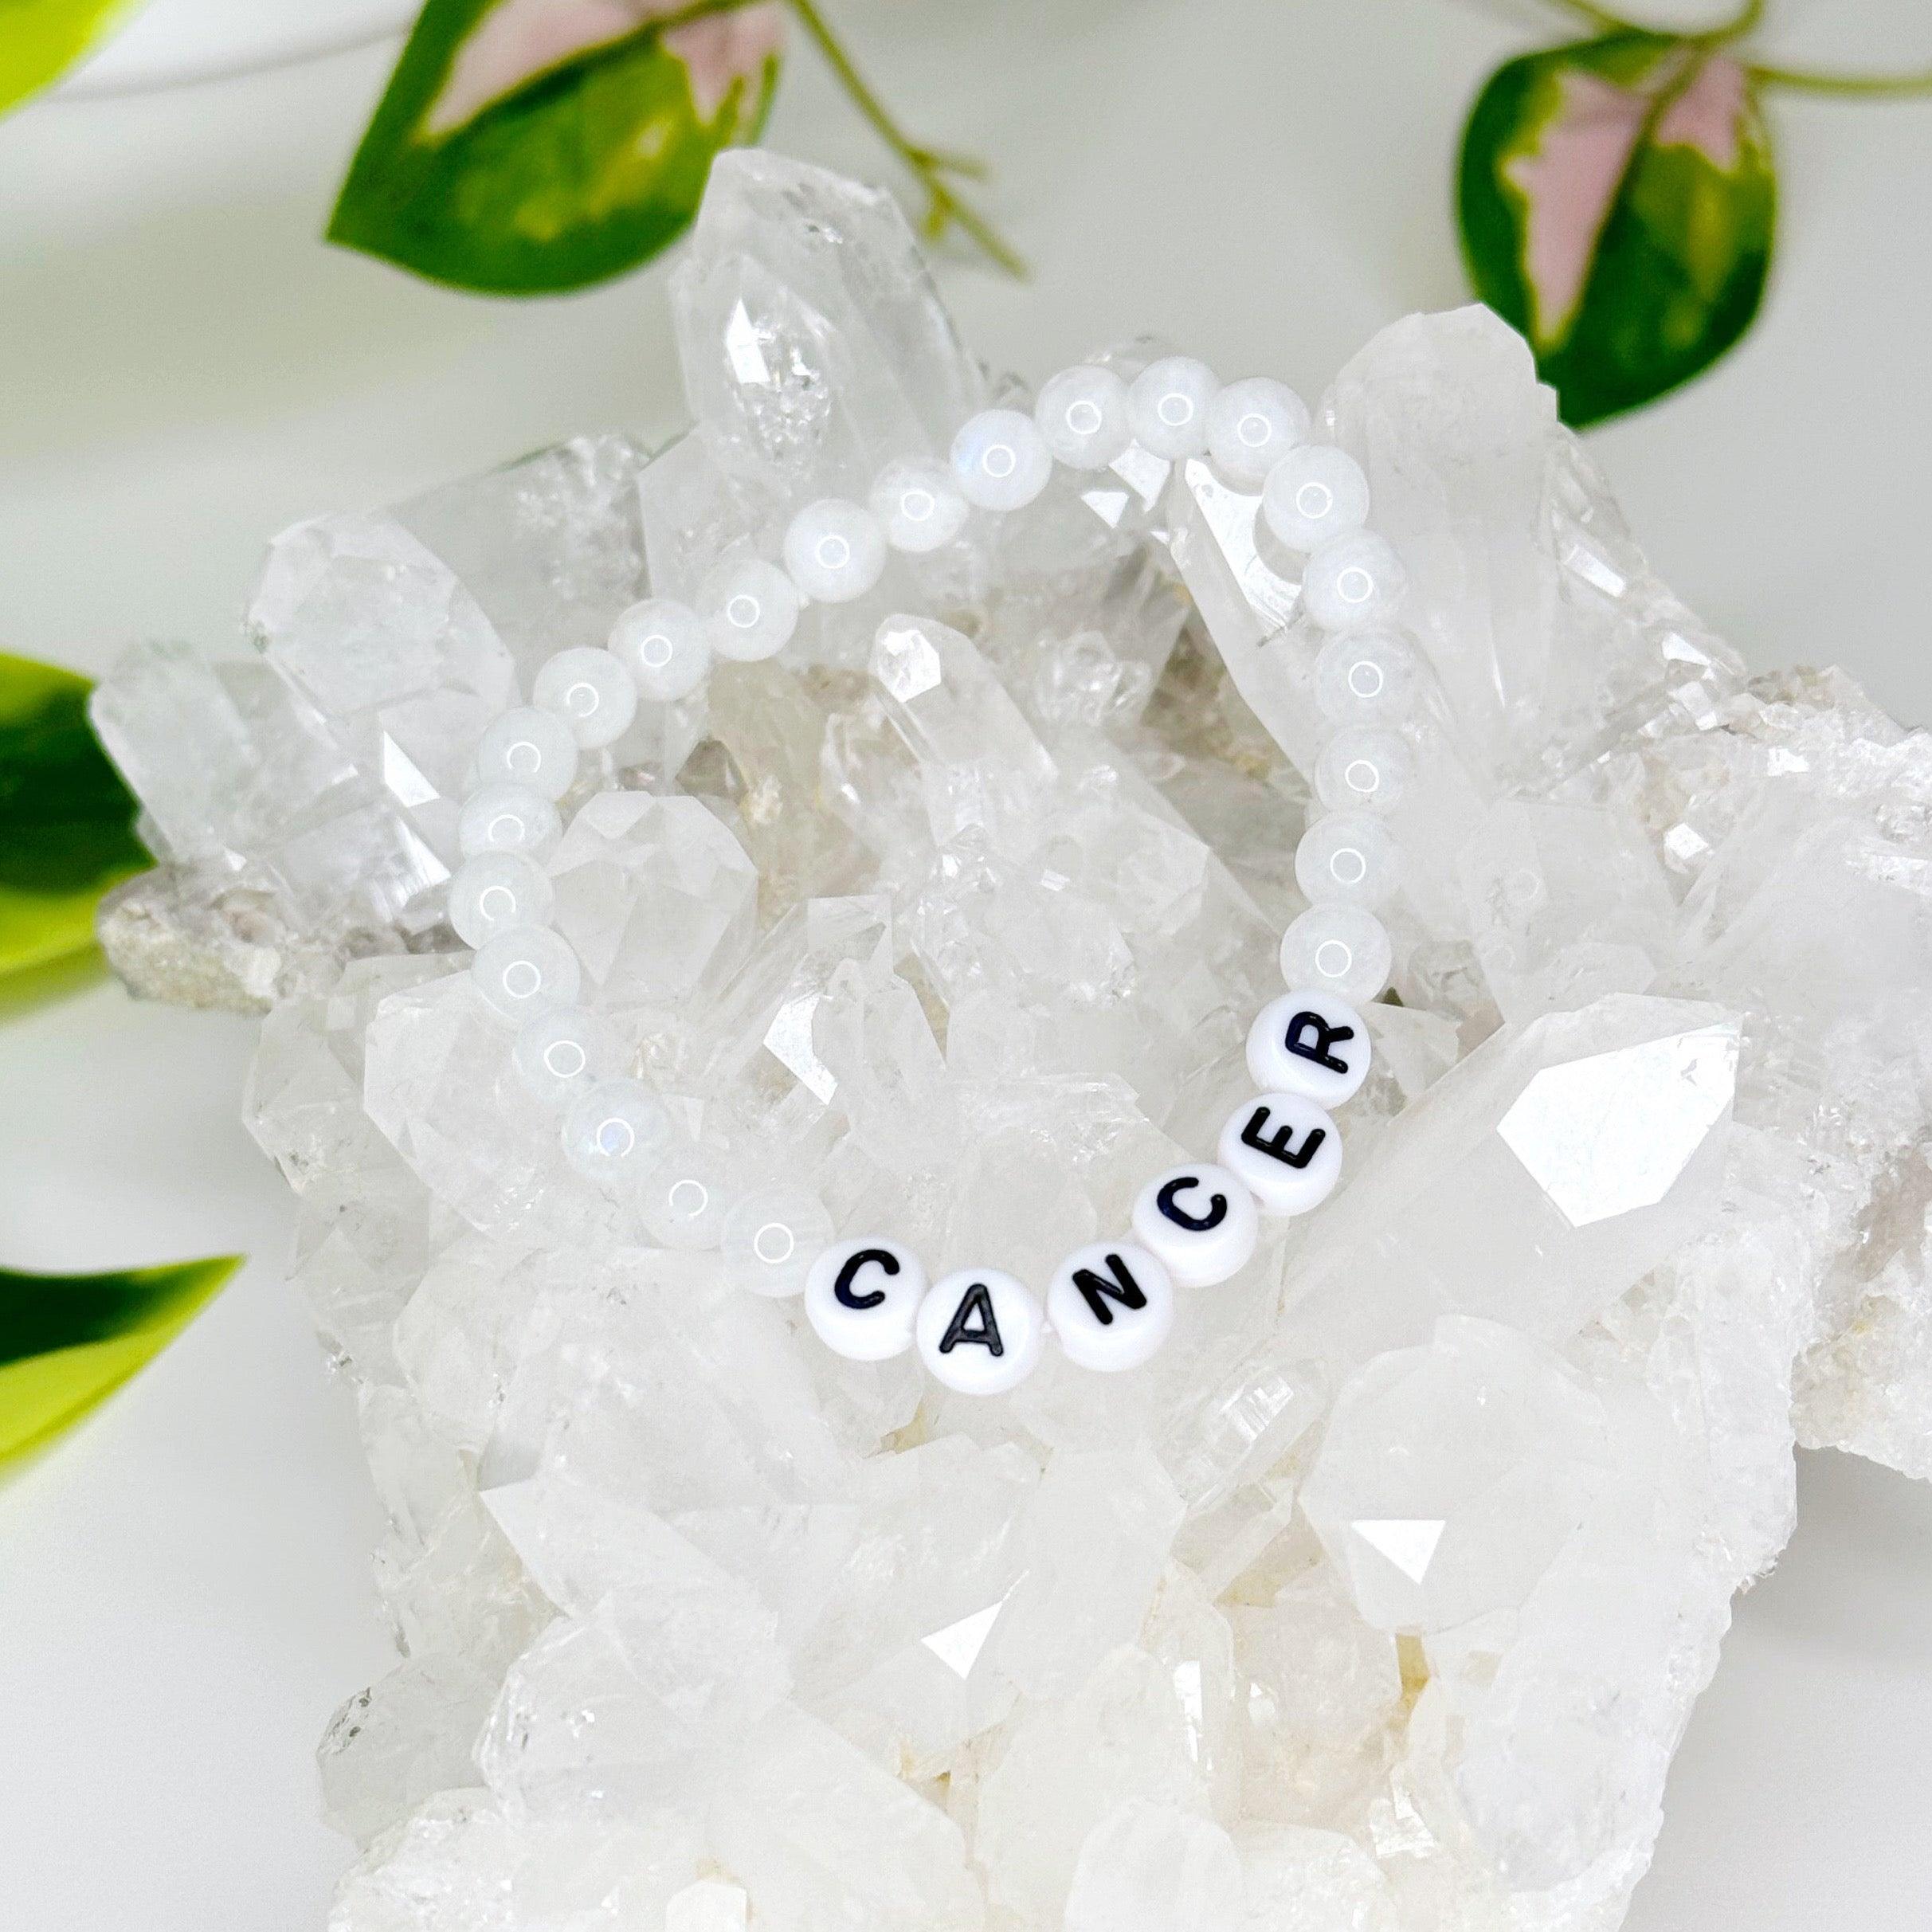 'CANCER' MOONSTONE 6mm - HANDMADE CRYSTAL BRACELET - 6mm, air, astro collection, bracelet, cancer, cancer season, cancer stack, clear/white, crystal bracelet, fertility, handmade bracelet, jewelry, moonstone, recently added, water, Wearable, white - The Mineral Maven